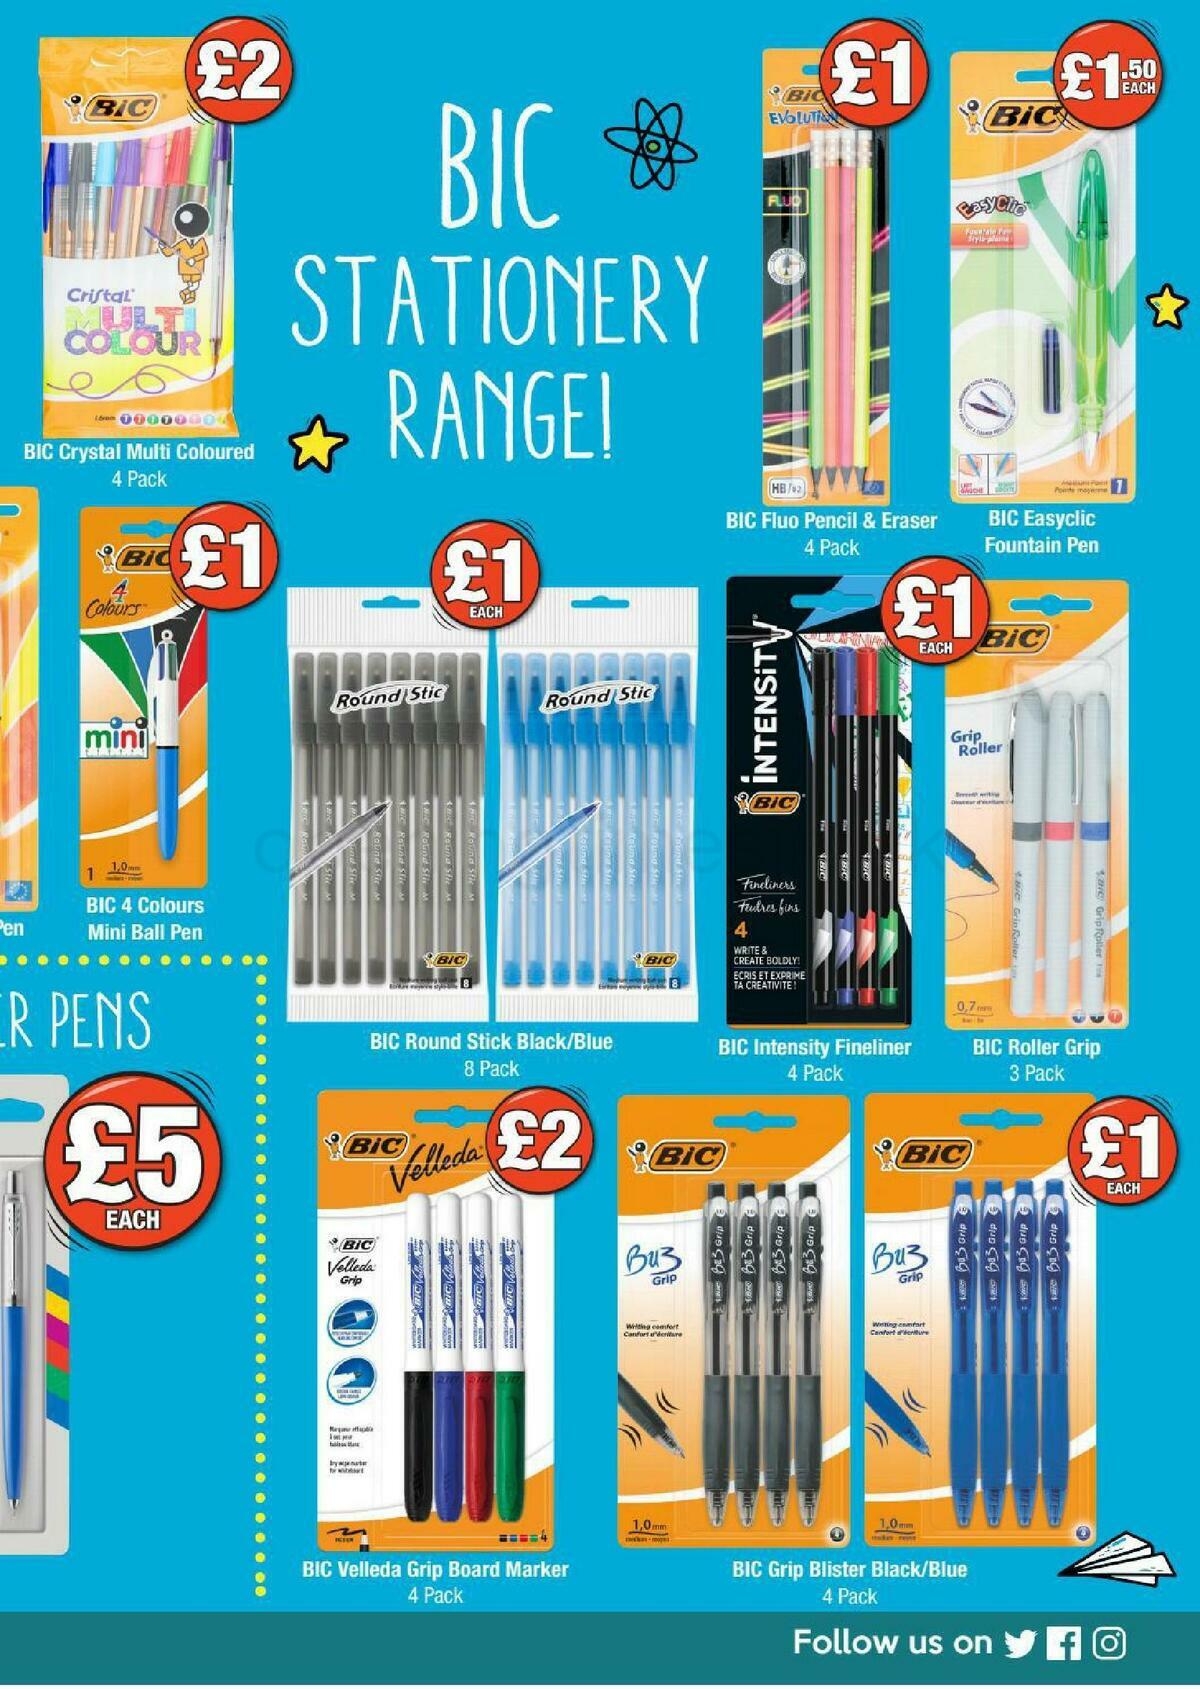 Poundland Back to School Offers from 1 September